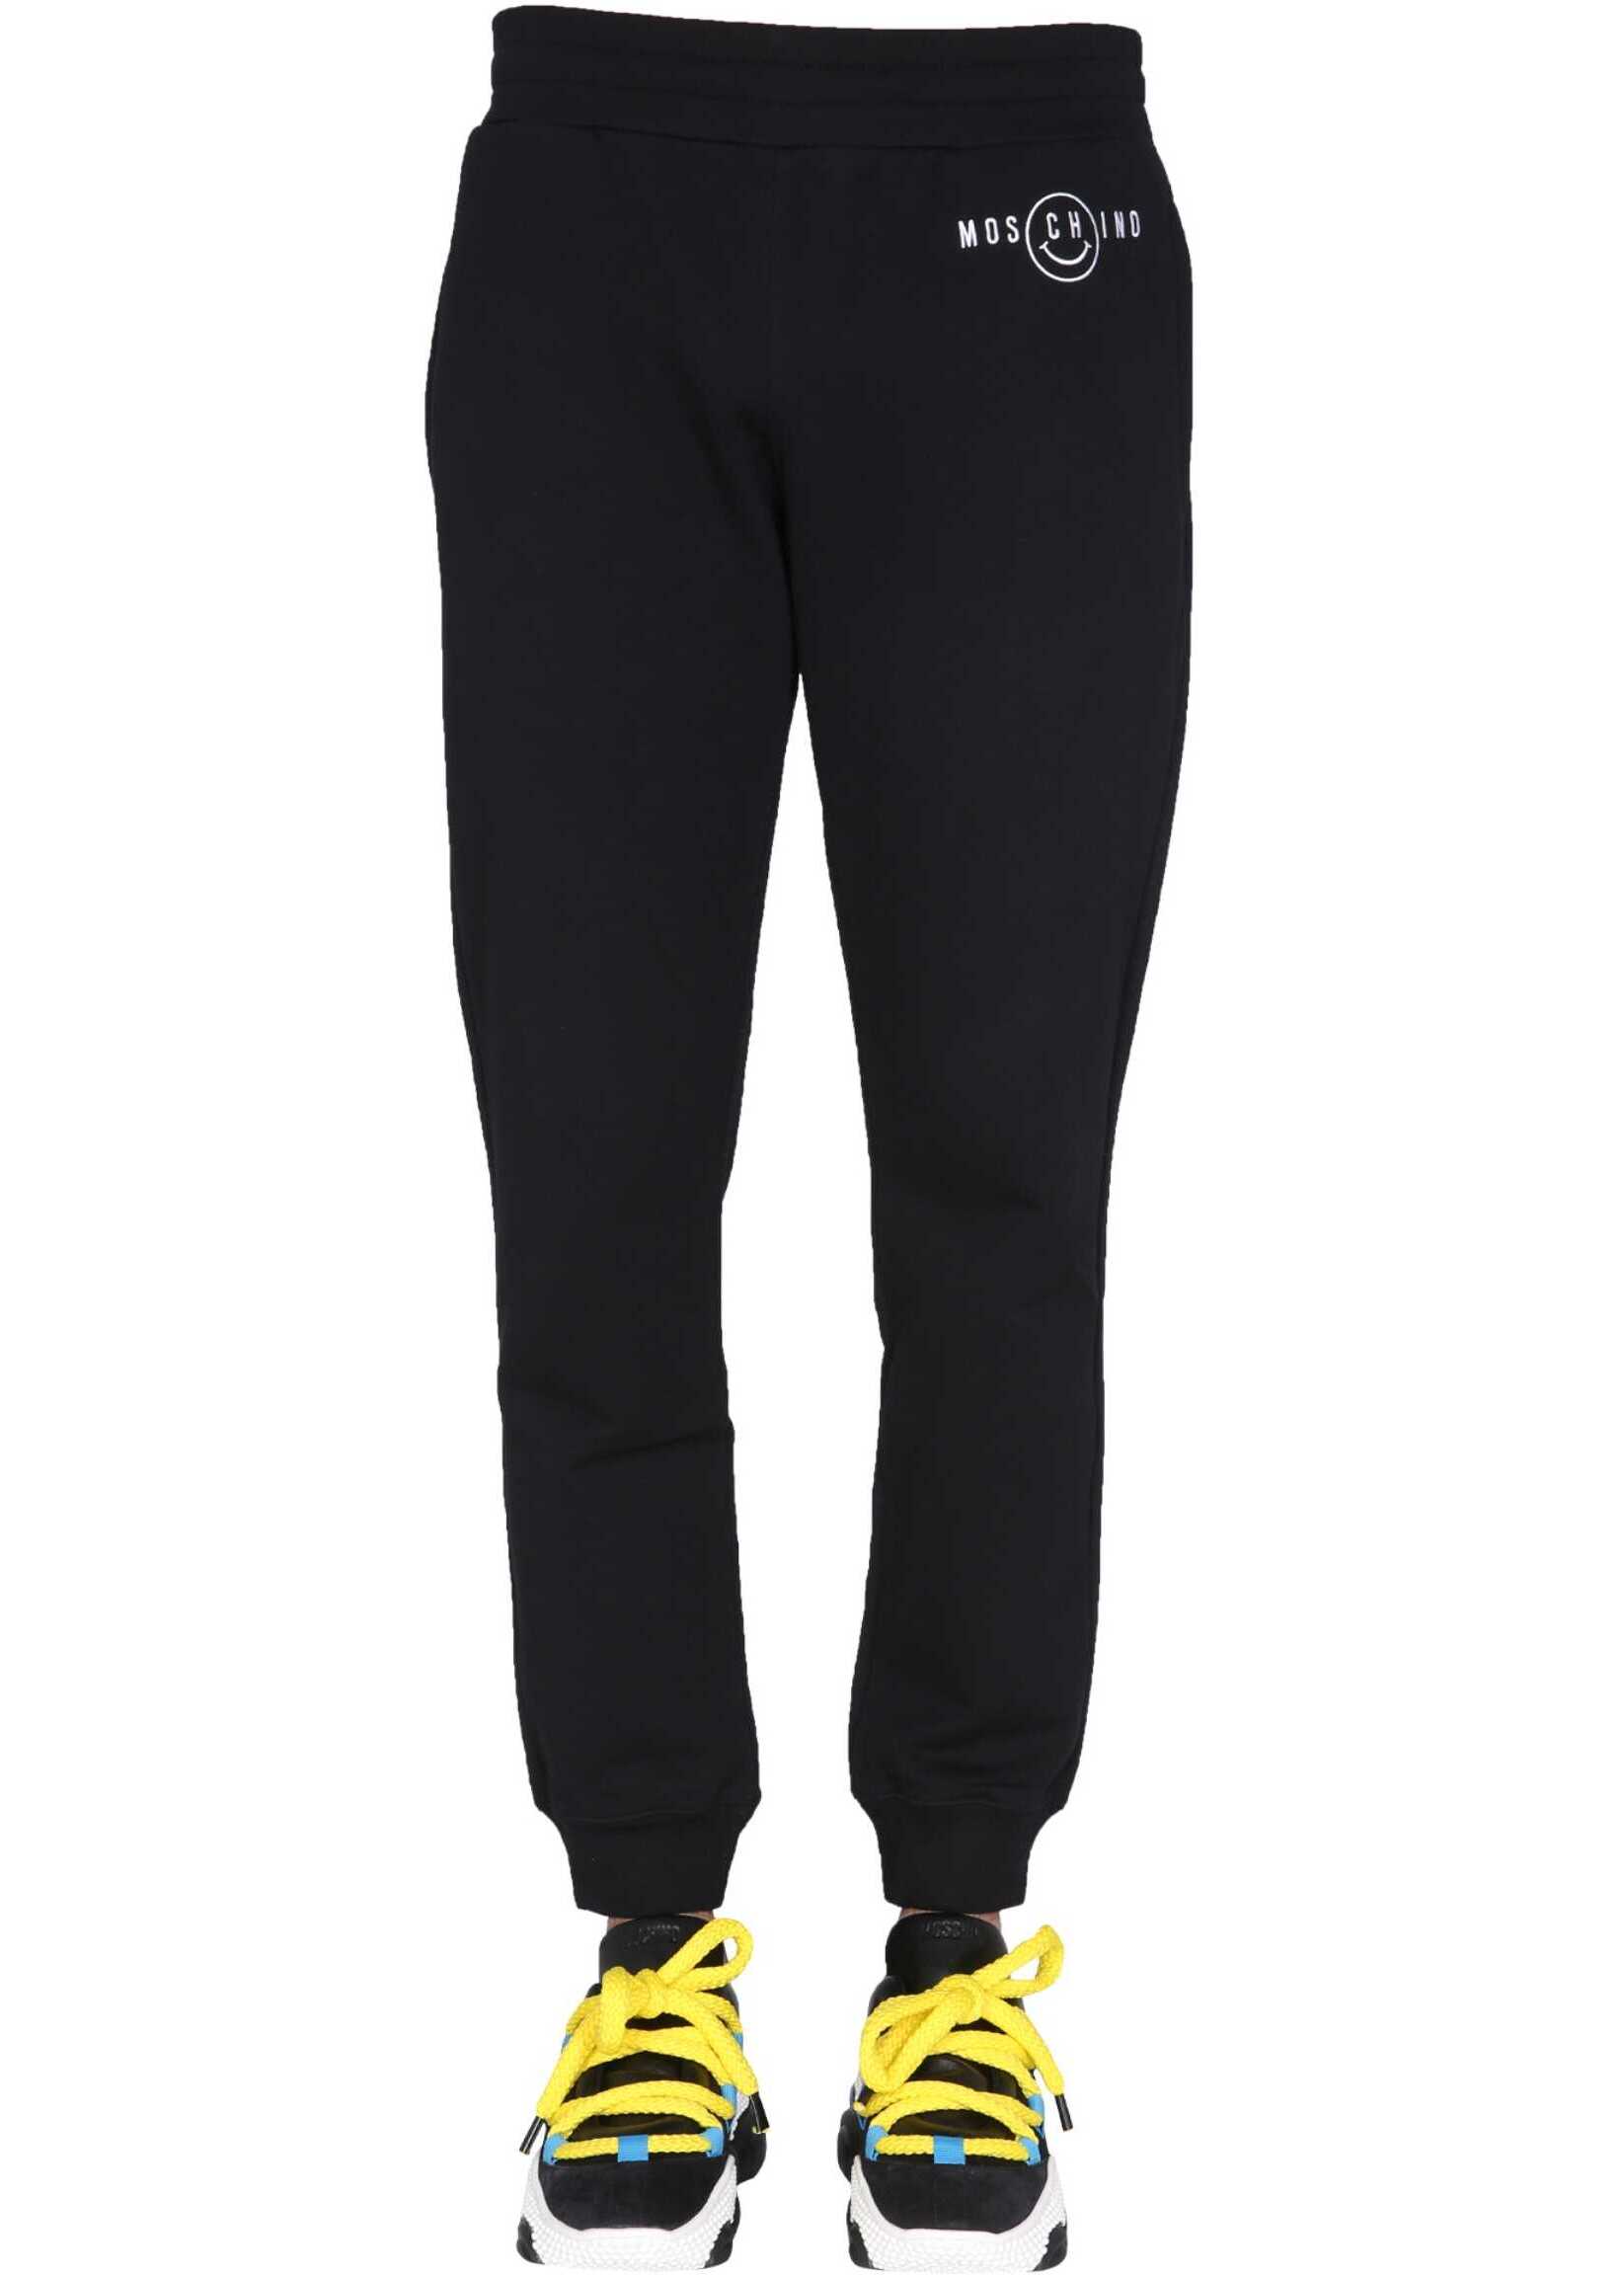 Moschino "Smile" Jogging Trousers* BLACK